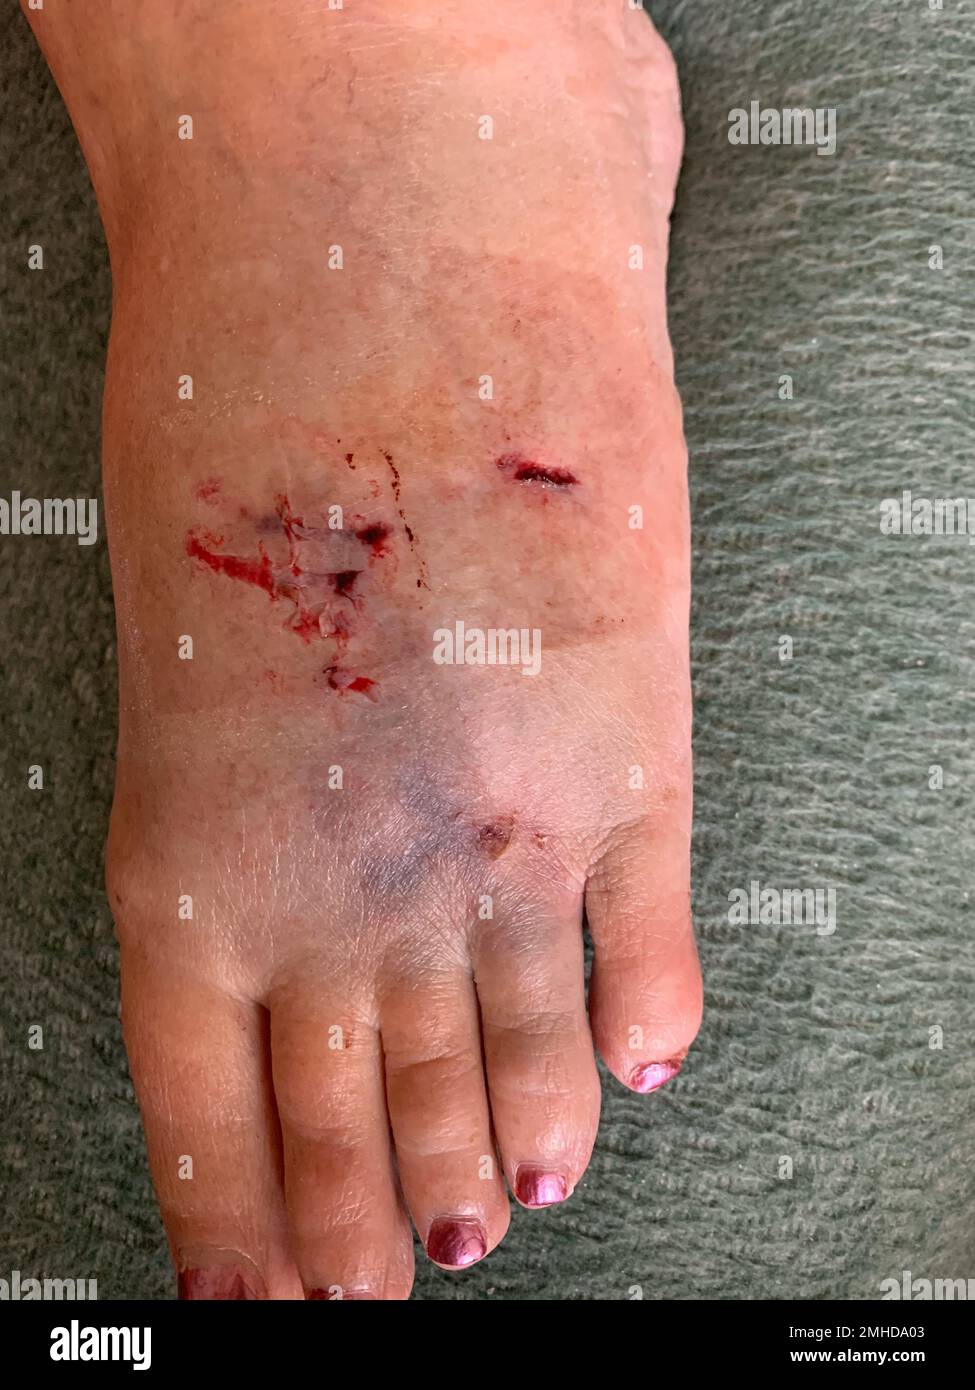 A woman's foot bitten by a dog Stock Photo